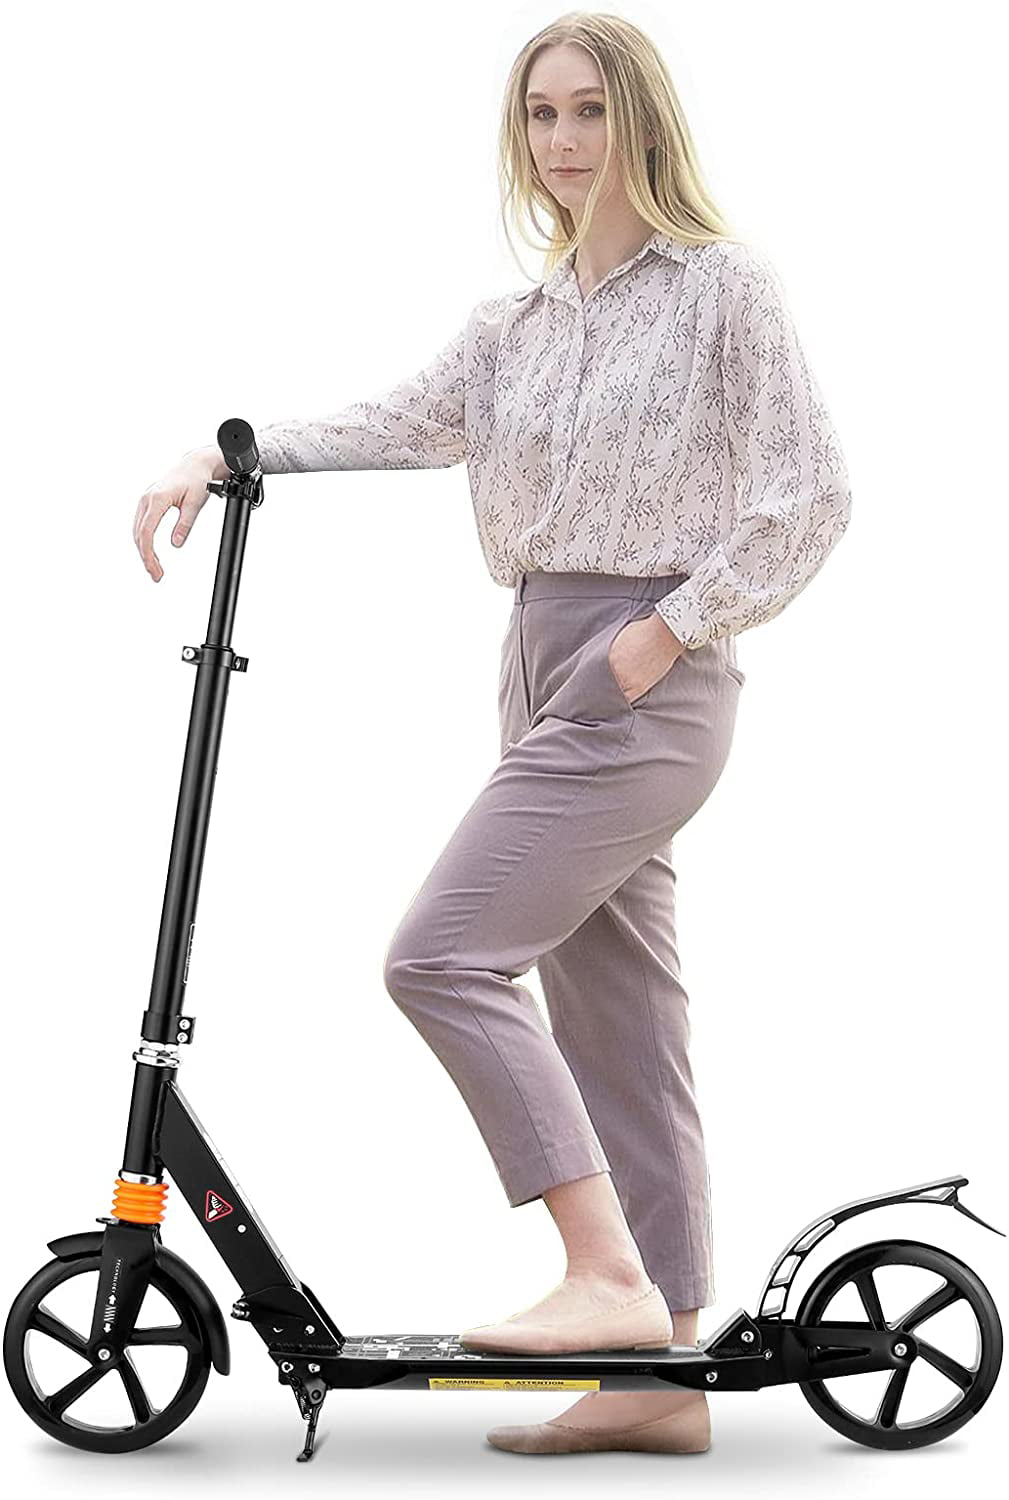 Details about   Adults Folding Kick Scooter & Dual Suspension Hight-Adjustable Urban Big Wheels 